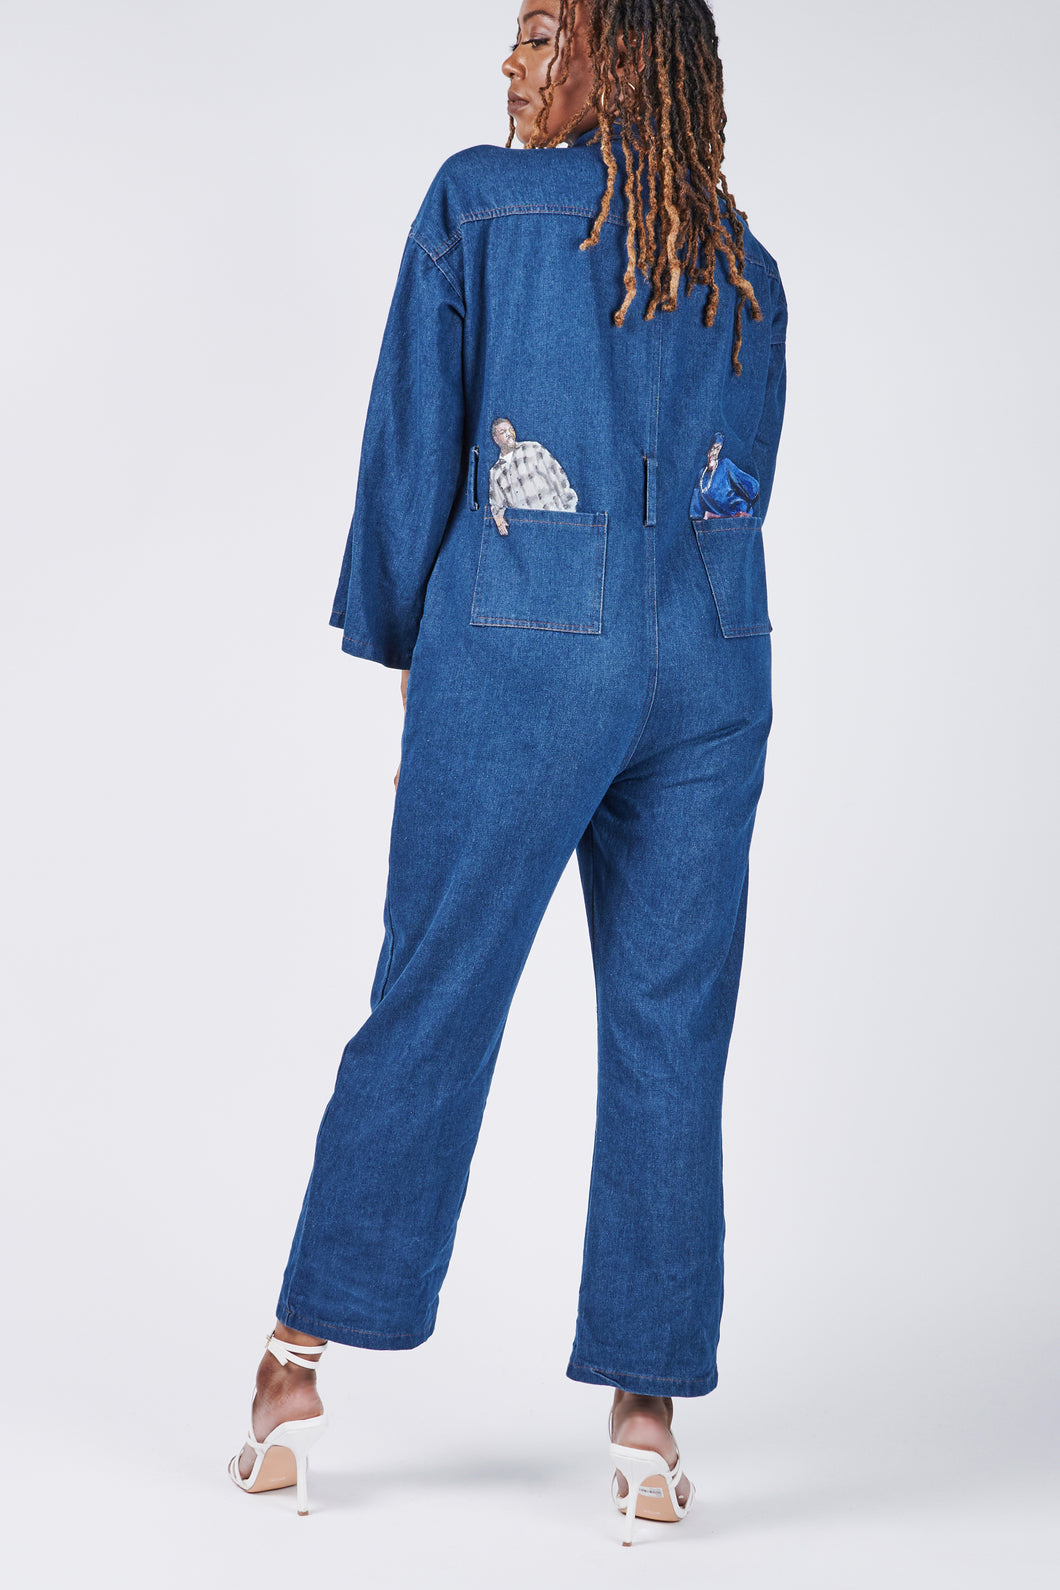 'Friday' Denim Coveralls with Bell Sleeve